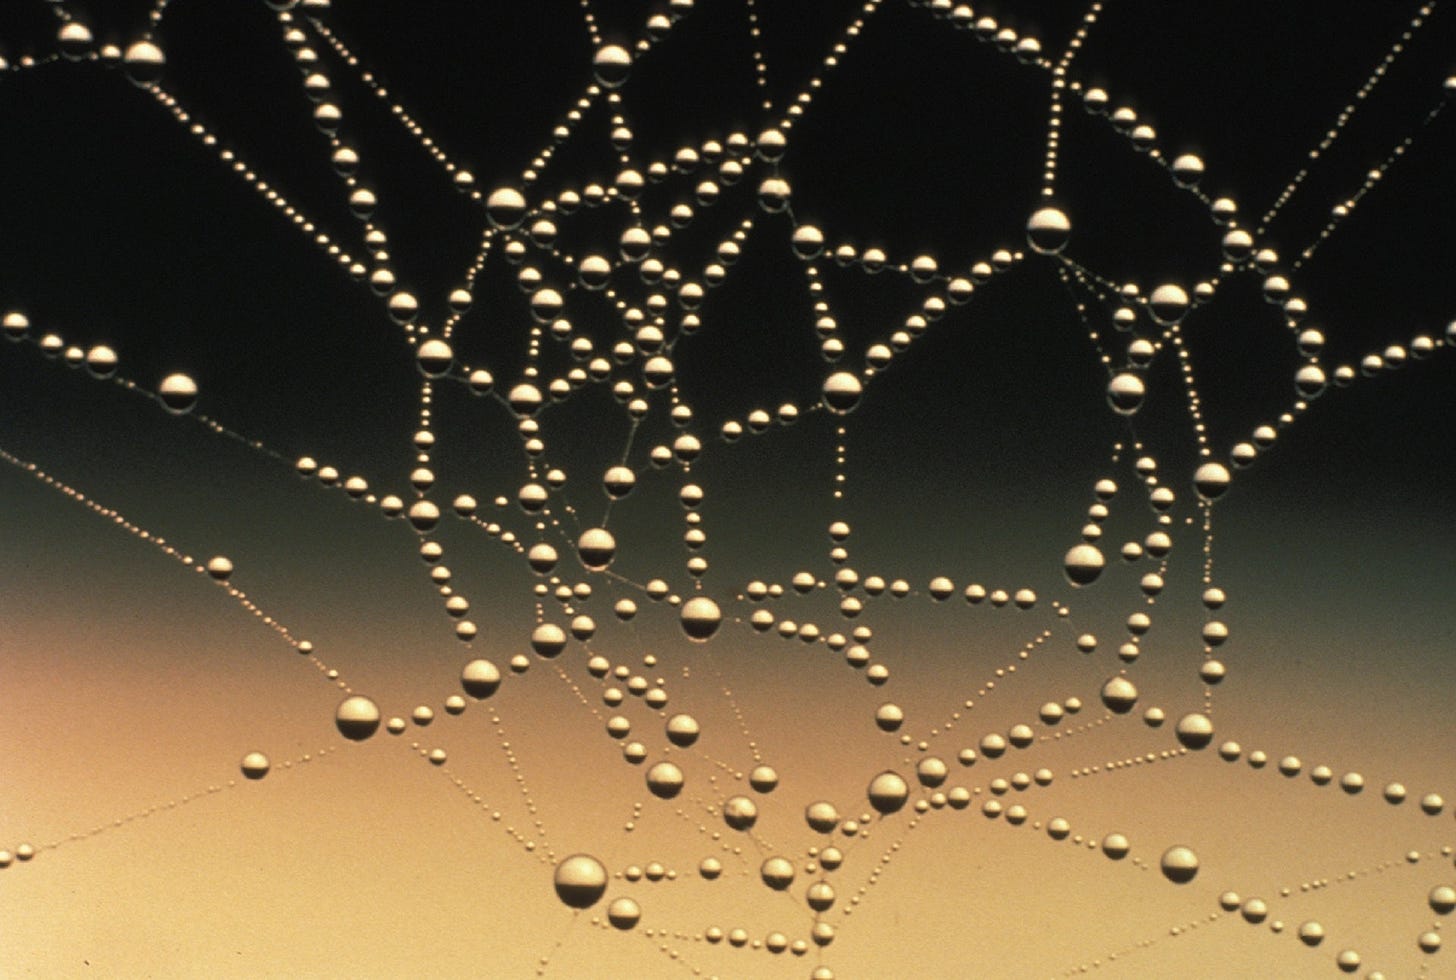 Spider's web with raindrops